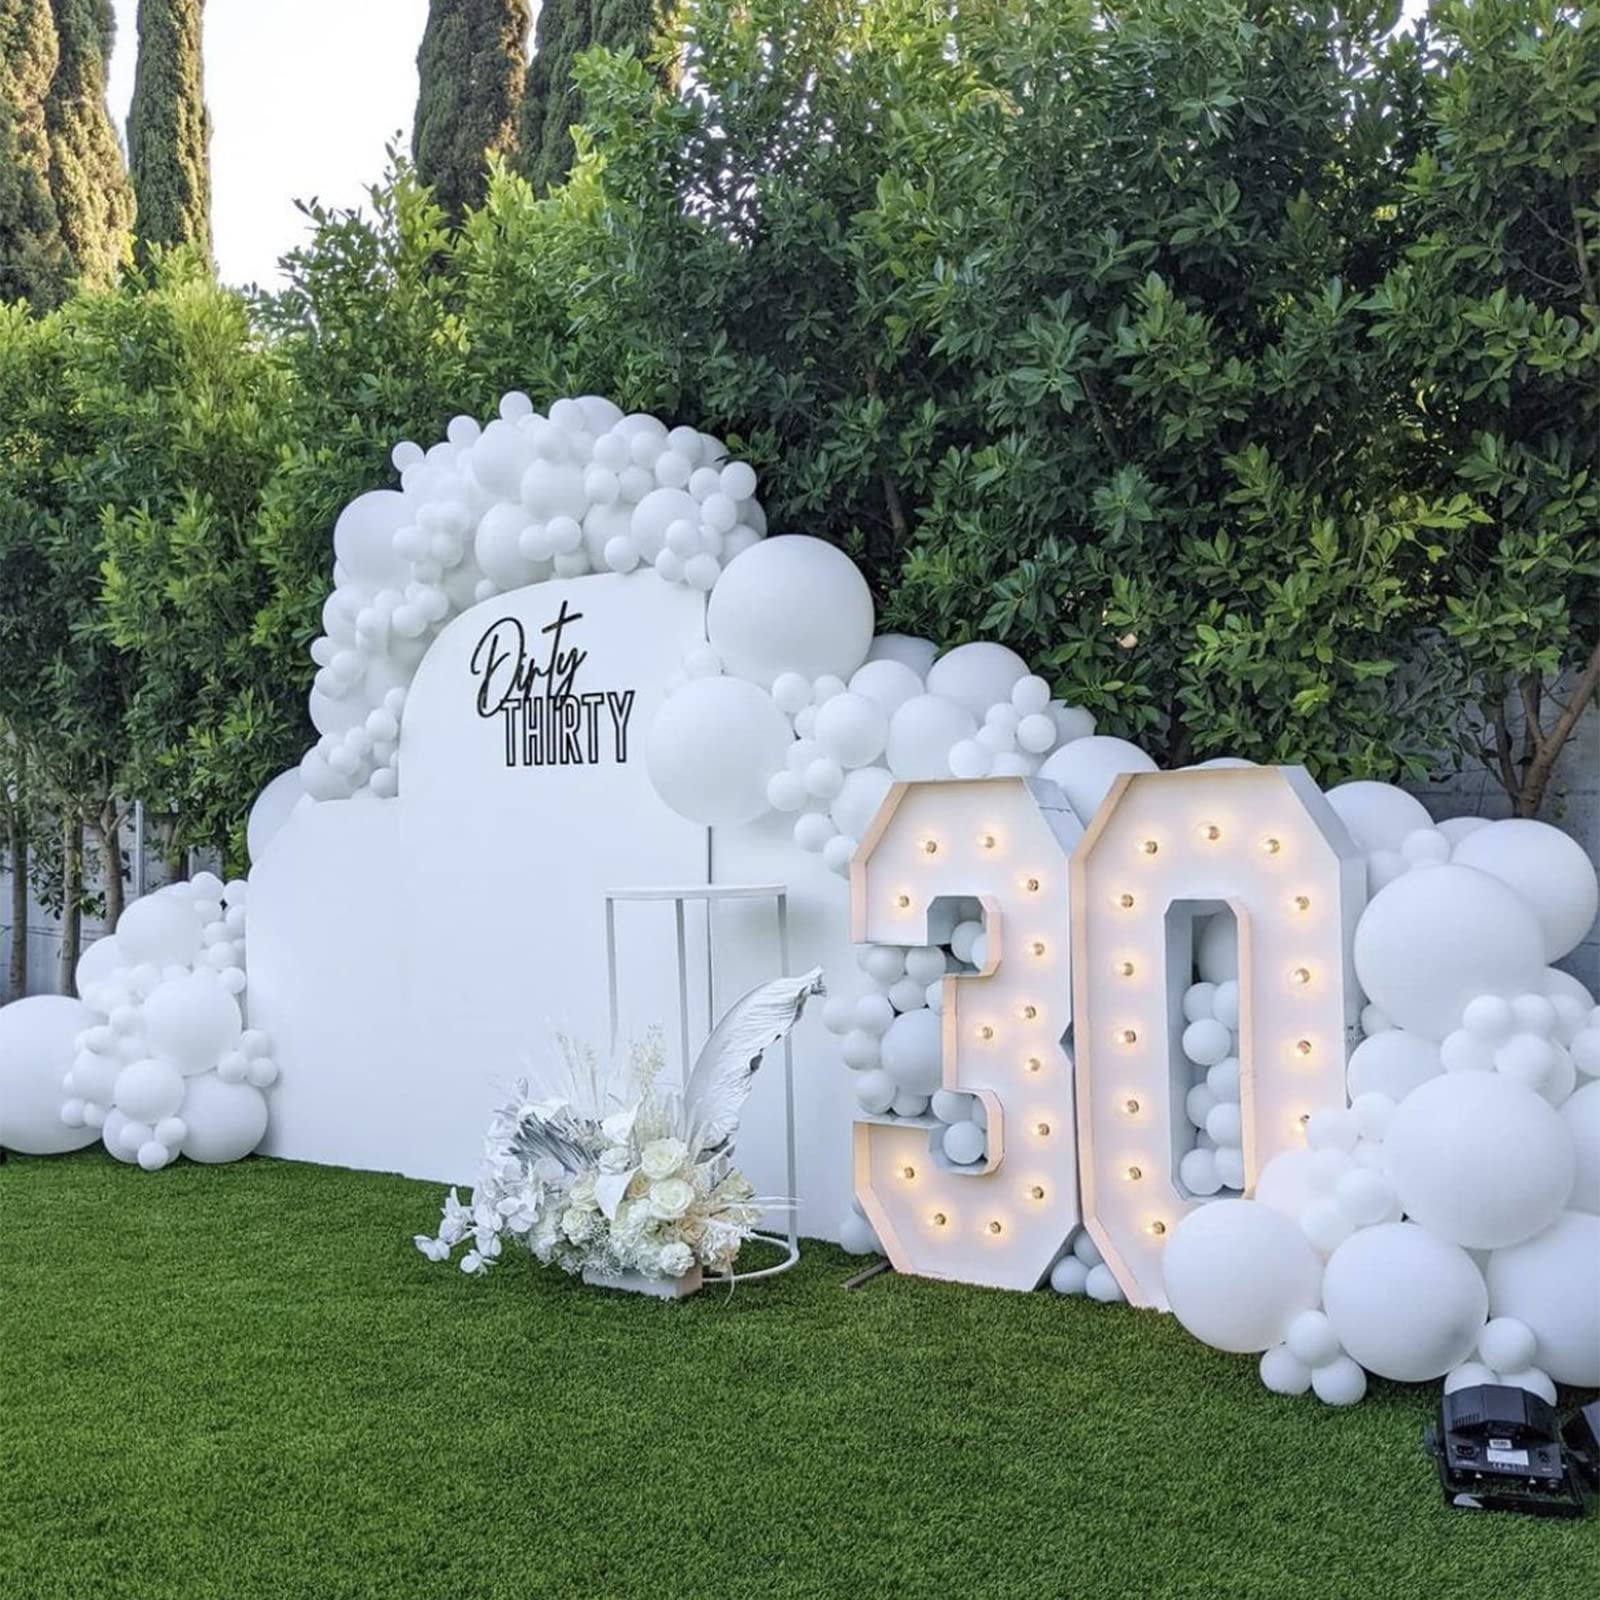 Freechase White Latex Balloons - White Party Balloons 139 Different Sizes 5/10/12/18 Inch, White Balloon Garland Kit for Birthdays, Graduation, Baby Shower, Wedding, and Bachelorette Party Balloons